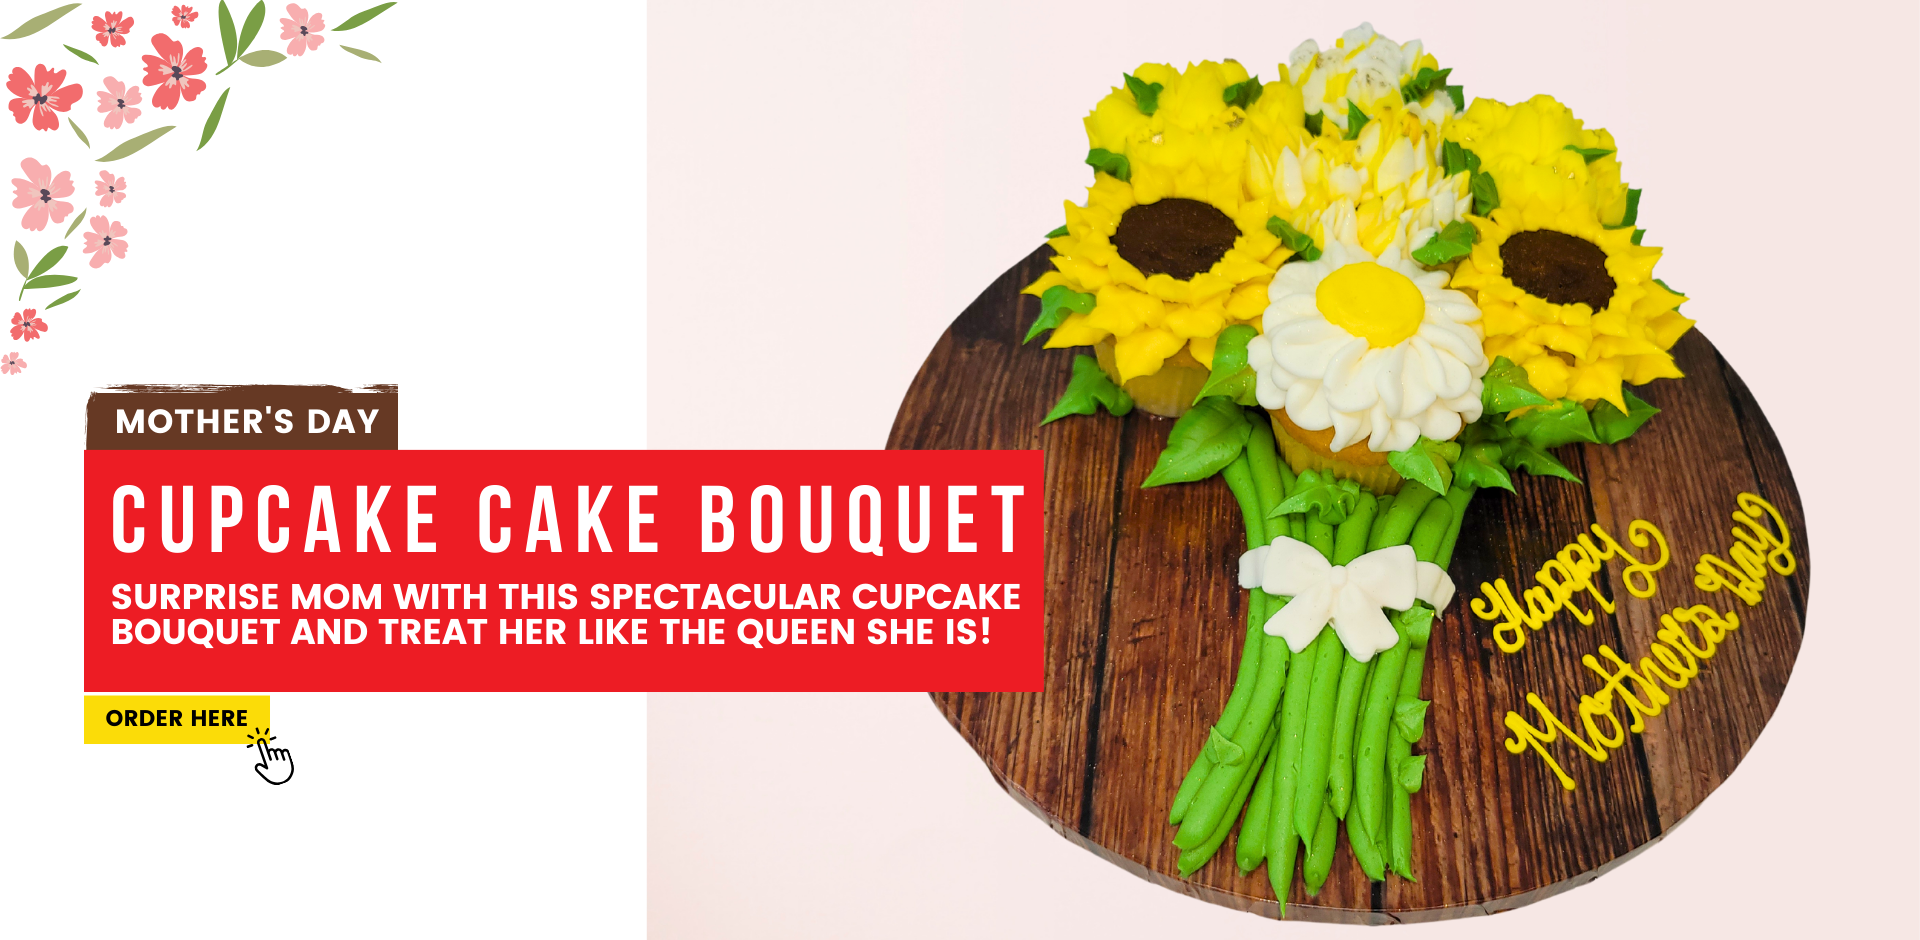 Mother's Day. cupcake cake bouquet. surprise mom with this spectacular cupcake bouquet and treat her like the queen she is! Order Here